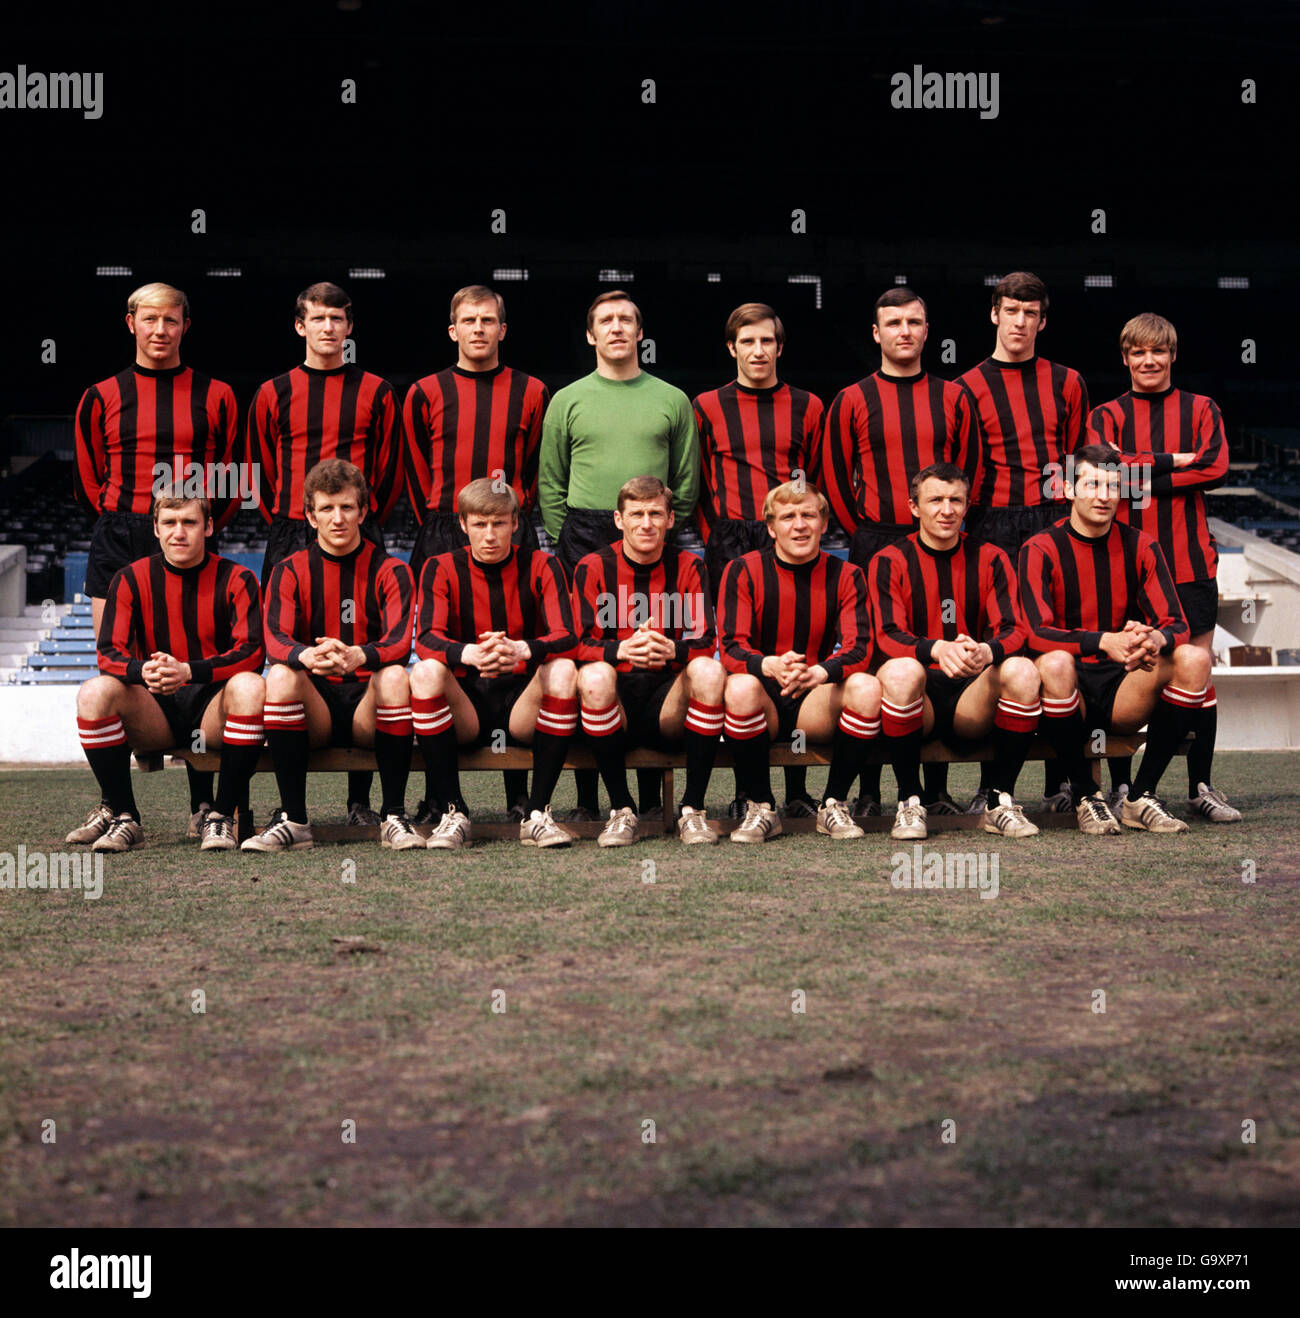 Fila posteriore, (da sinistra a destra): George Helsop, Mike Doyle, Alan Oakes, Harry Dowd, Arthur Mann, Glyn Pardoe, Tommy Booth e Tony Coleman. Prima fila (da sinistra a destra): David Connor, Bobby Owen, Colin Bell, Tony Book, Francis Lee, Mike Summerbee e Neil Young. Aprile 1969 Foto Stock